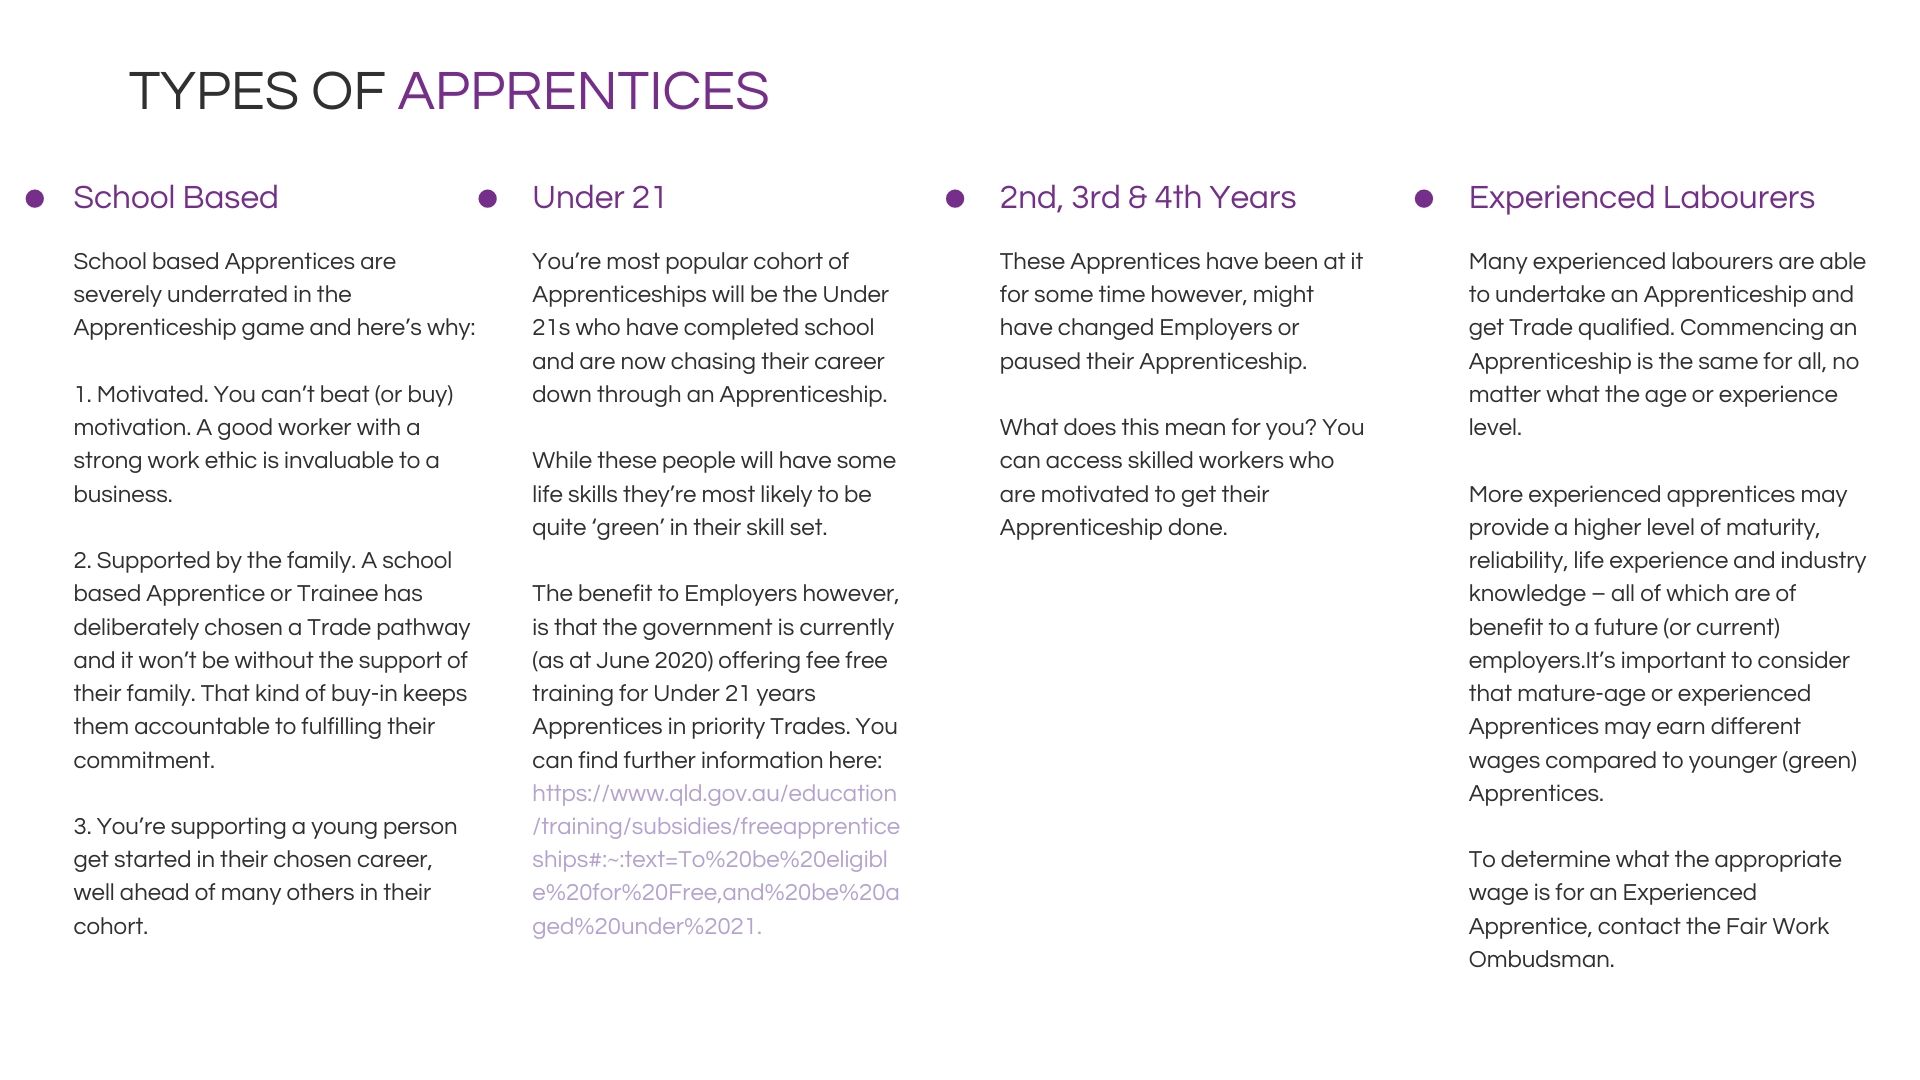 Guide to Employing an Apprentice Document (4)